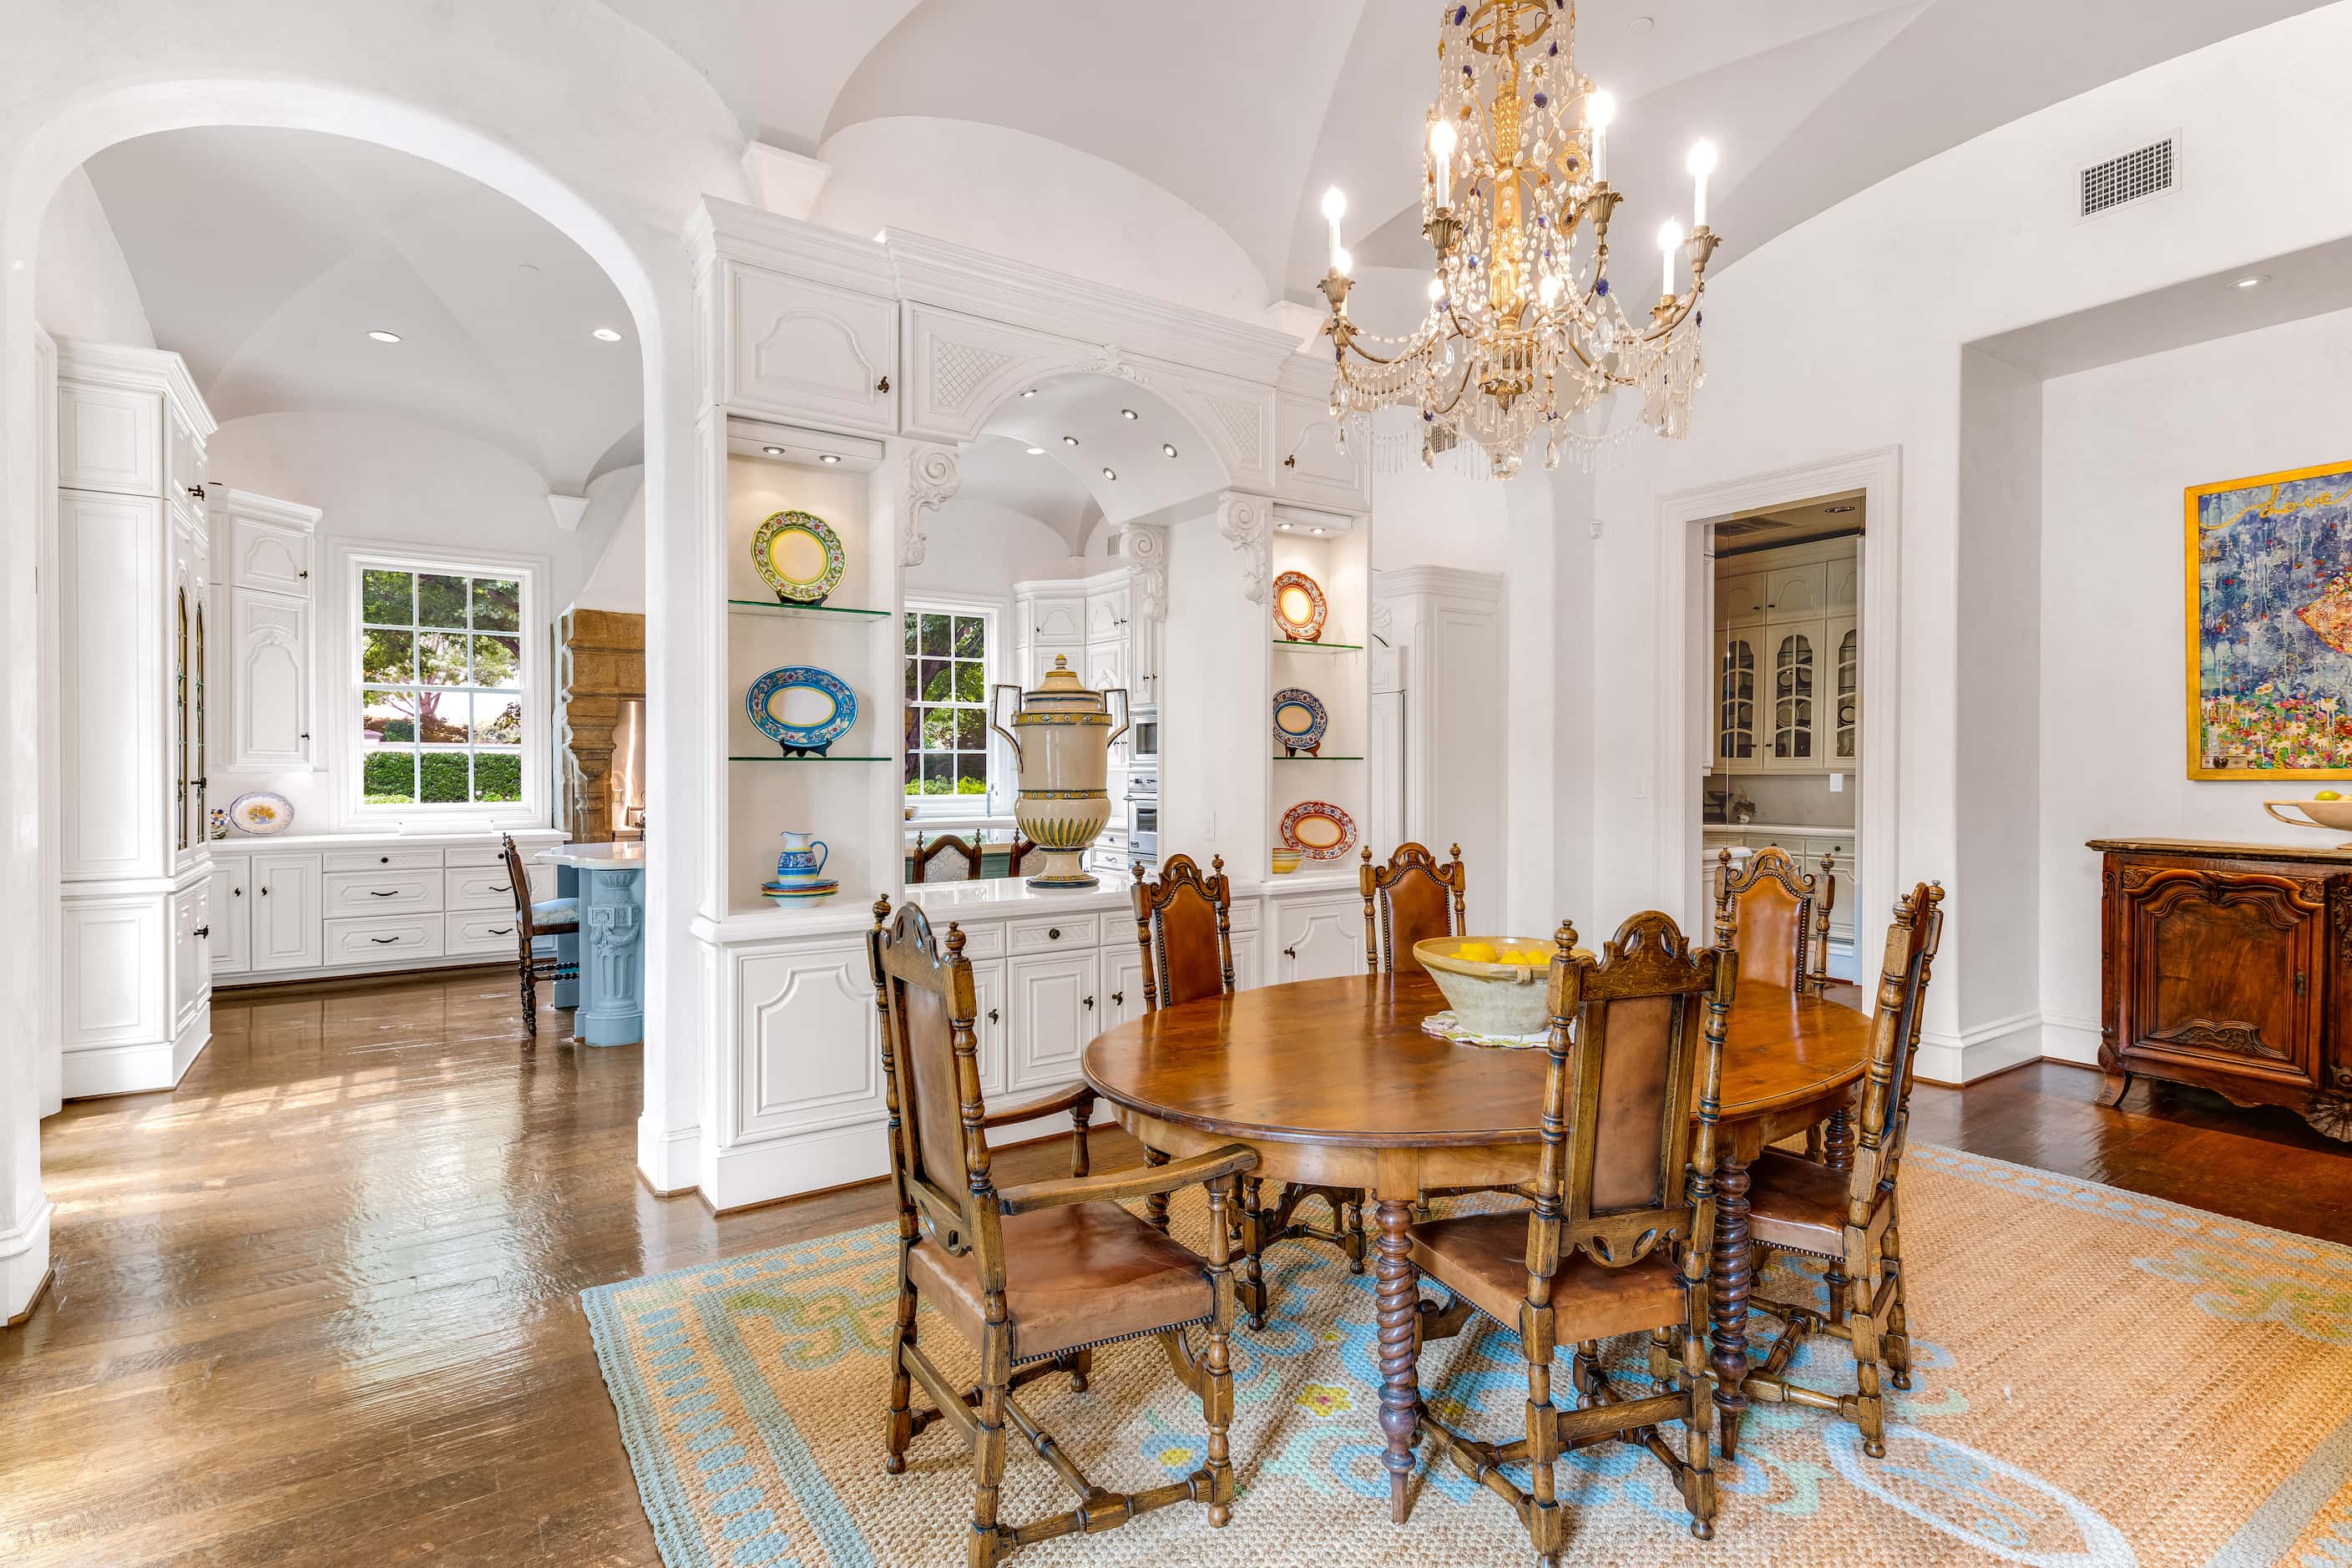 Dubbed The White House of Dallas, the mansion at 10777 Strait Lane is back on the market....